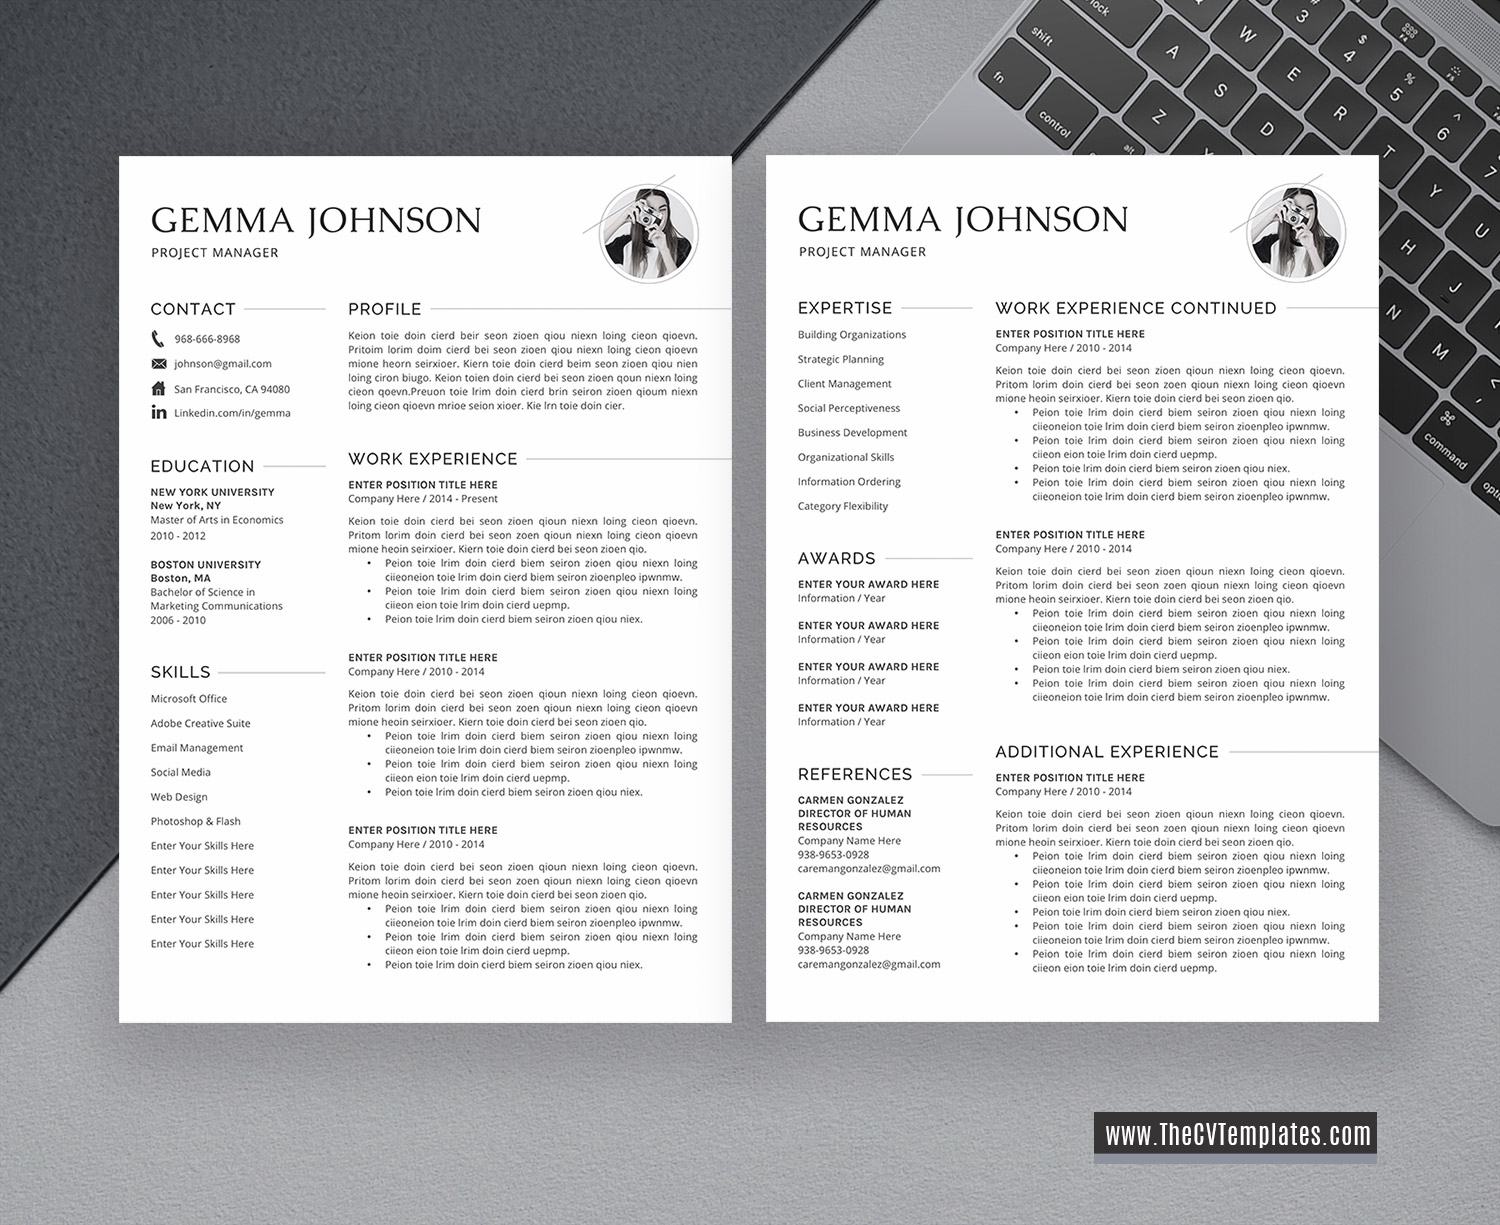 2019 Editable Resume Template for New Grad Jobs Instant Download Cover Letter ANNA Professional Creative Resume 1-5 Pages Word Resume